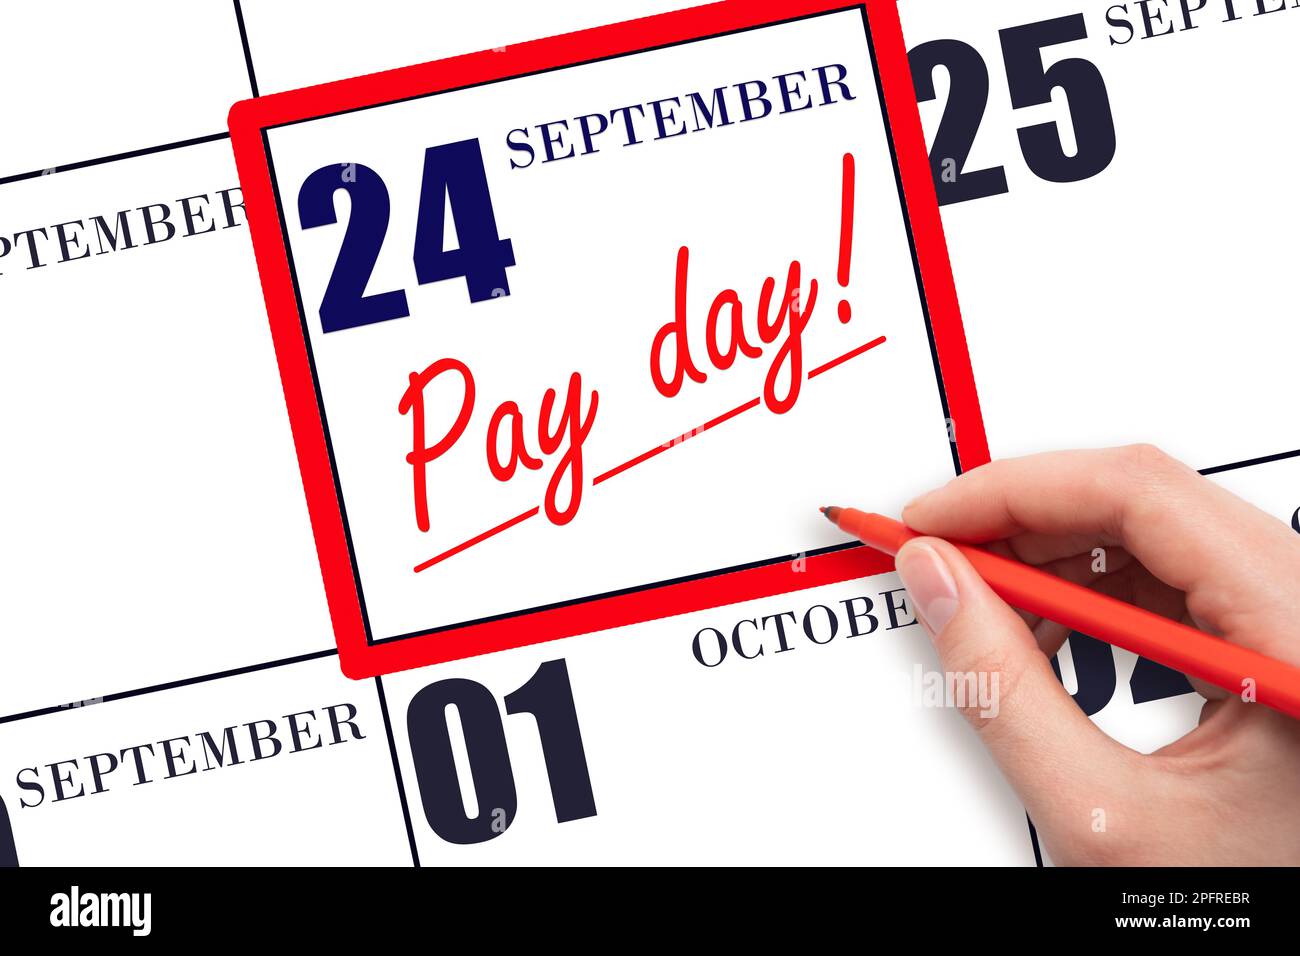 24th day of September. Hand writing text PAY DATE on calendar date September  24 and underline it. Payment due date.  Reminder concept of payment. Aut Stock Photo